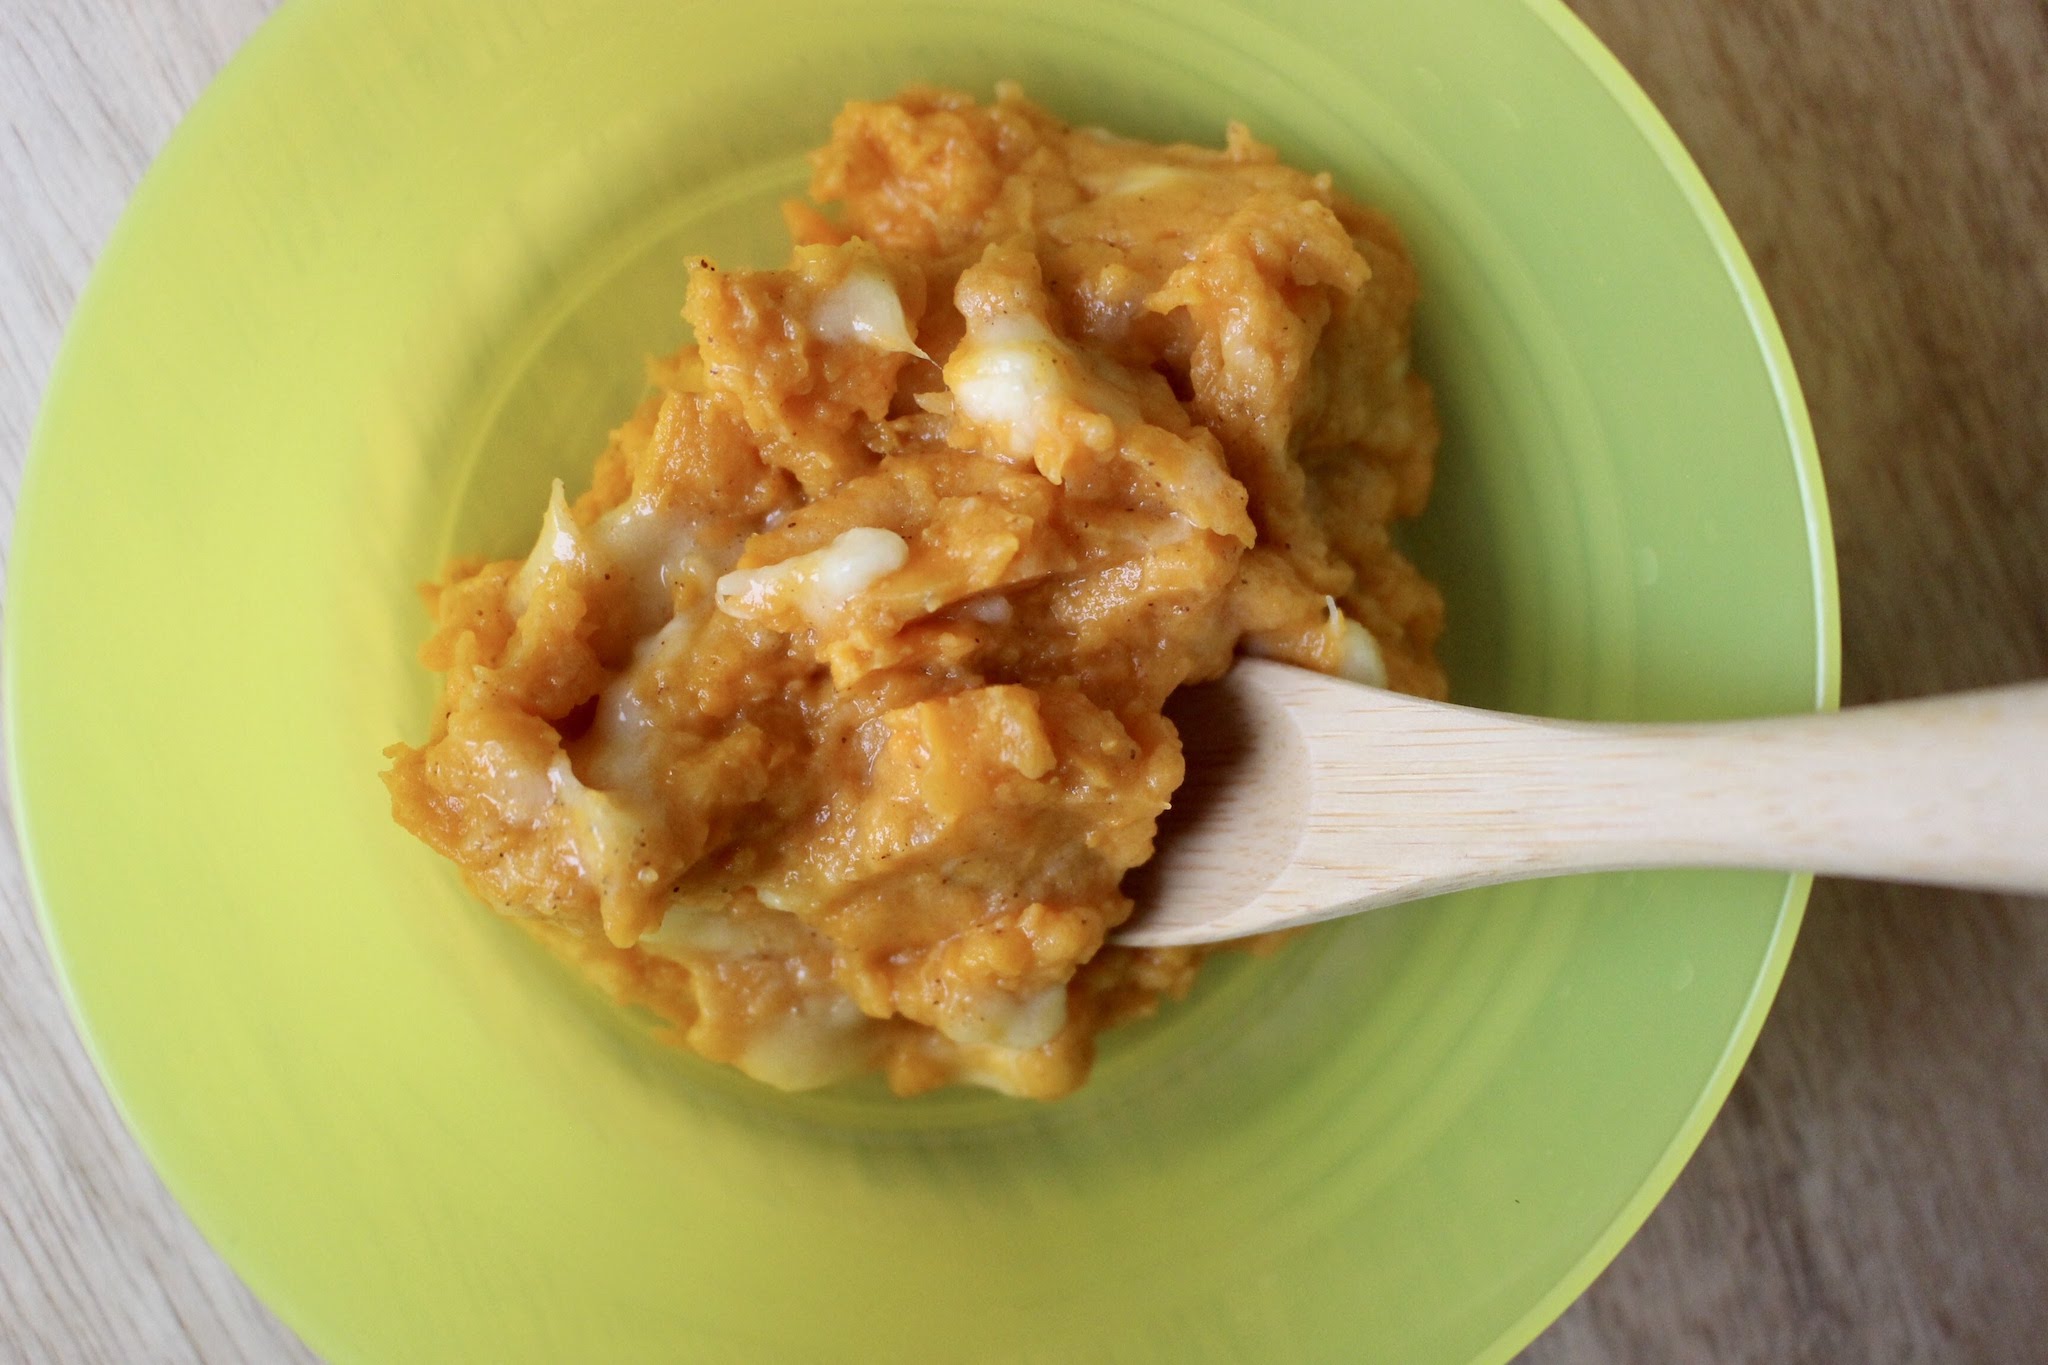 Homemade Sweet Potato Banana Baby Food by popular New Jersey foodie blog What's For Dinner Esq.